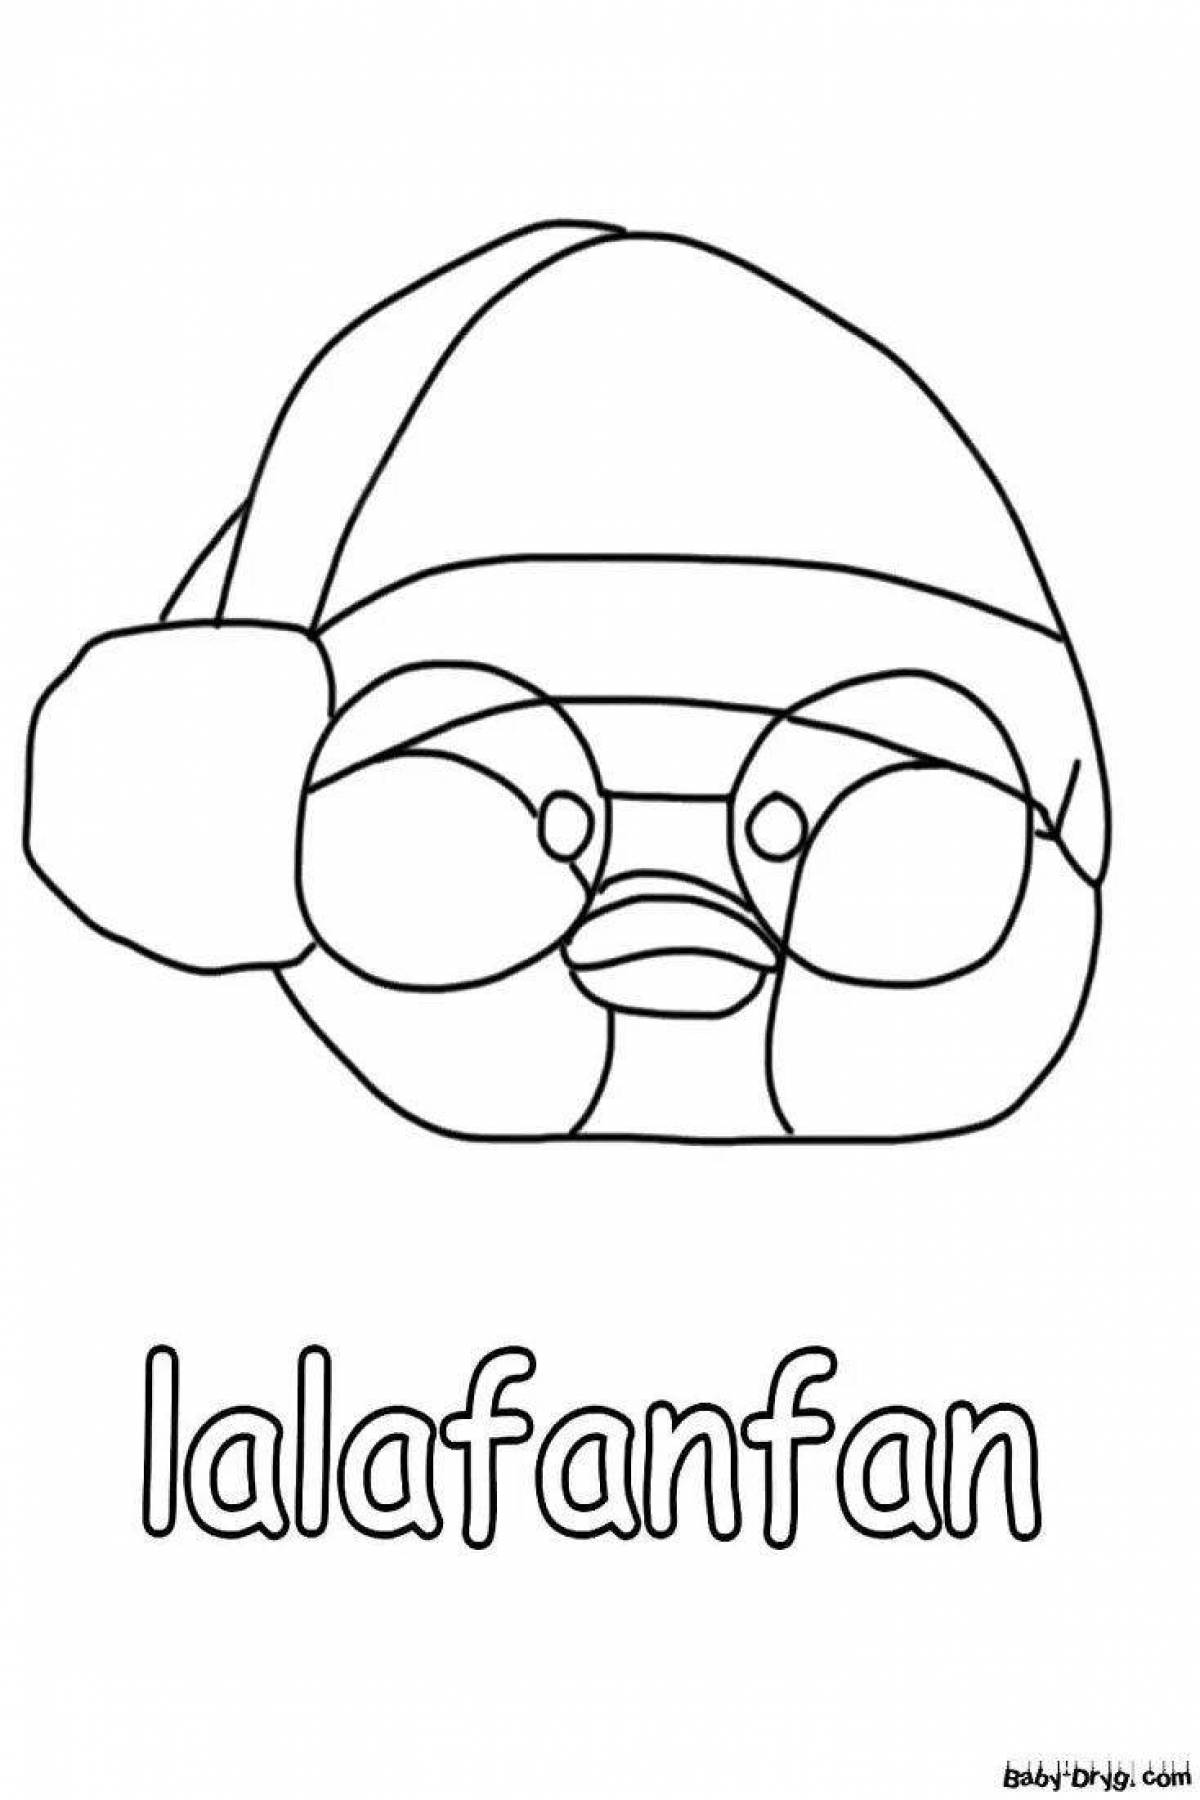 Lalafan creative coloring book for kids